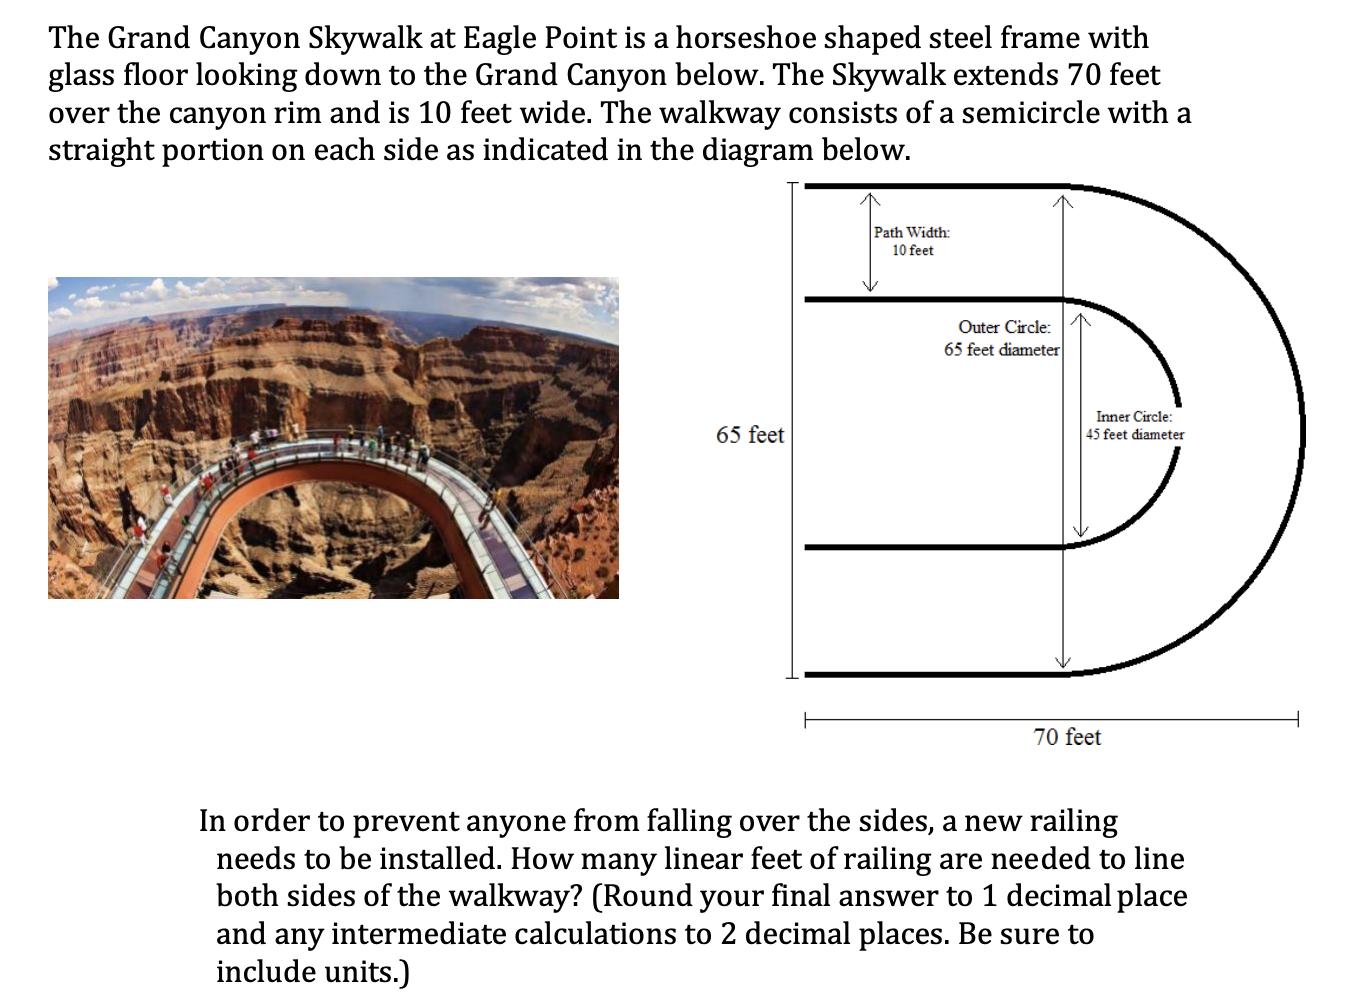 The Grand Canyon Skywalk at Eagle Point is a horseshoe shaped steel frame with glass floor looking down to the Grand Canyon b